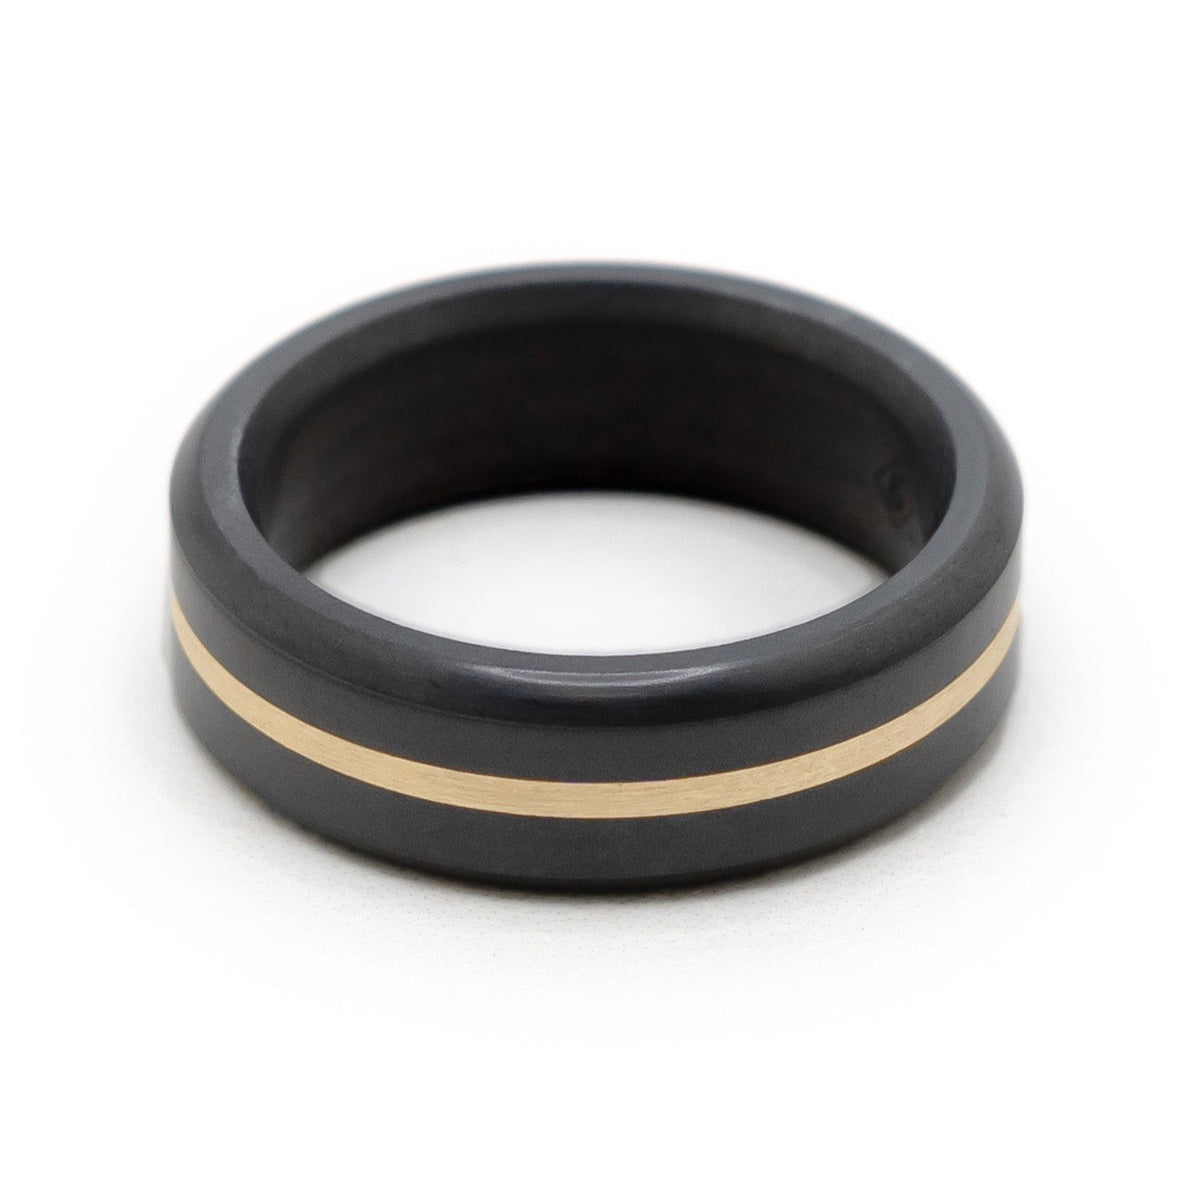 Kratos Rounded Gold Inlay Ring 7mm